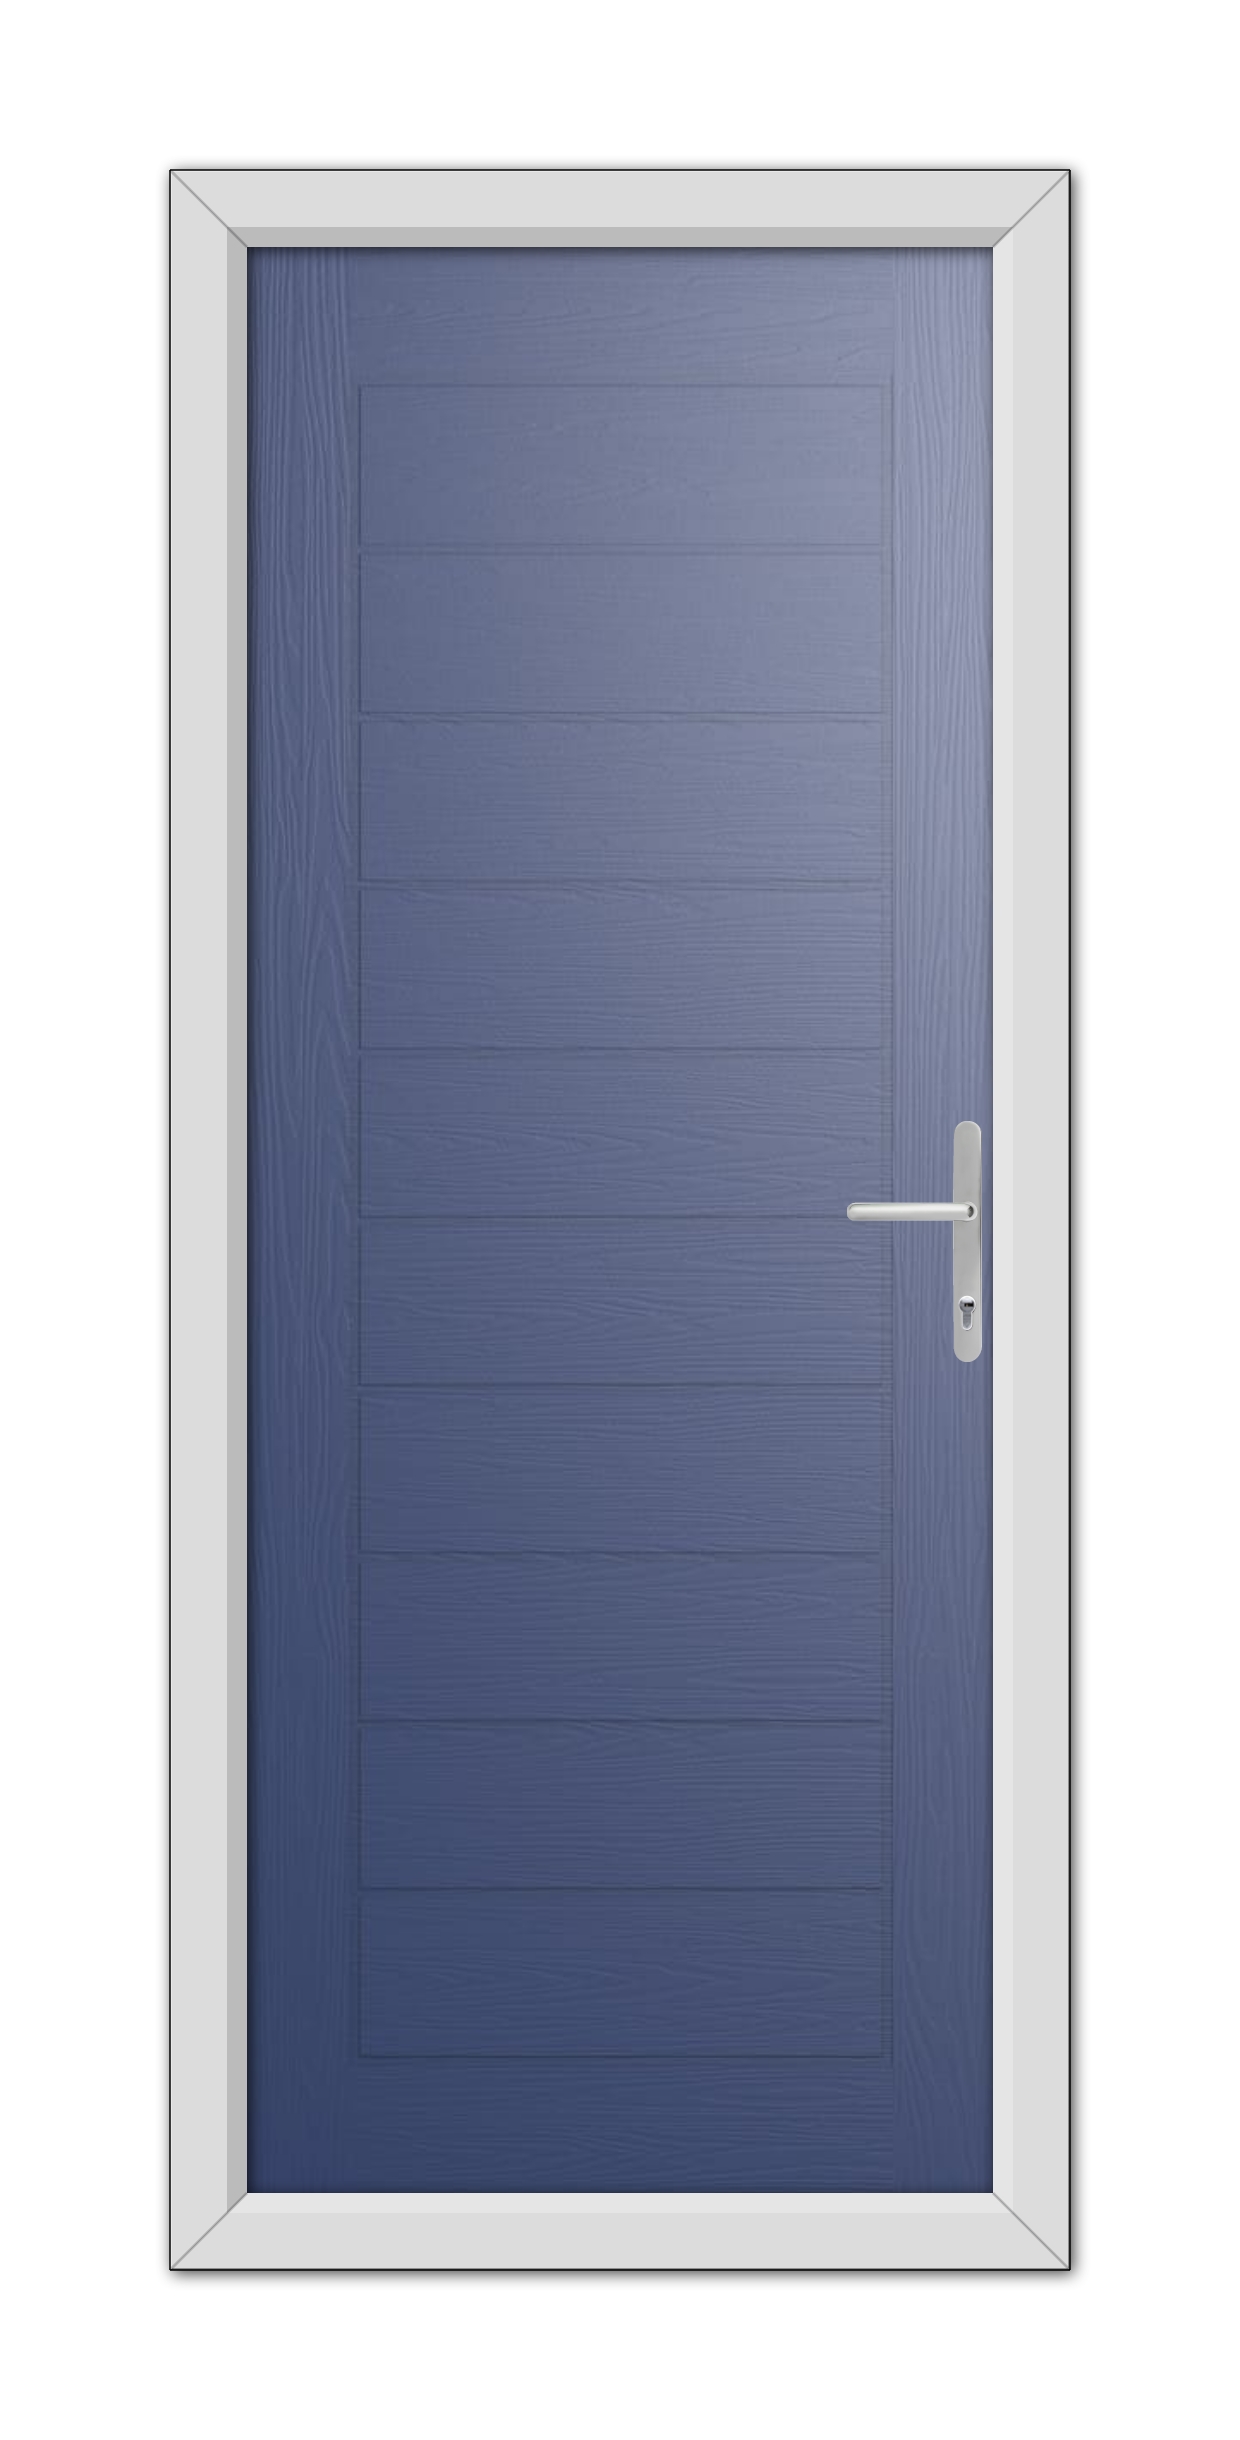 A modern Blue Cambridge Composite Door 48mm Timber Core with a metallic handle, set within a white frame, viewed from the front.